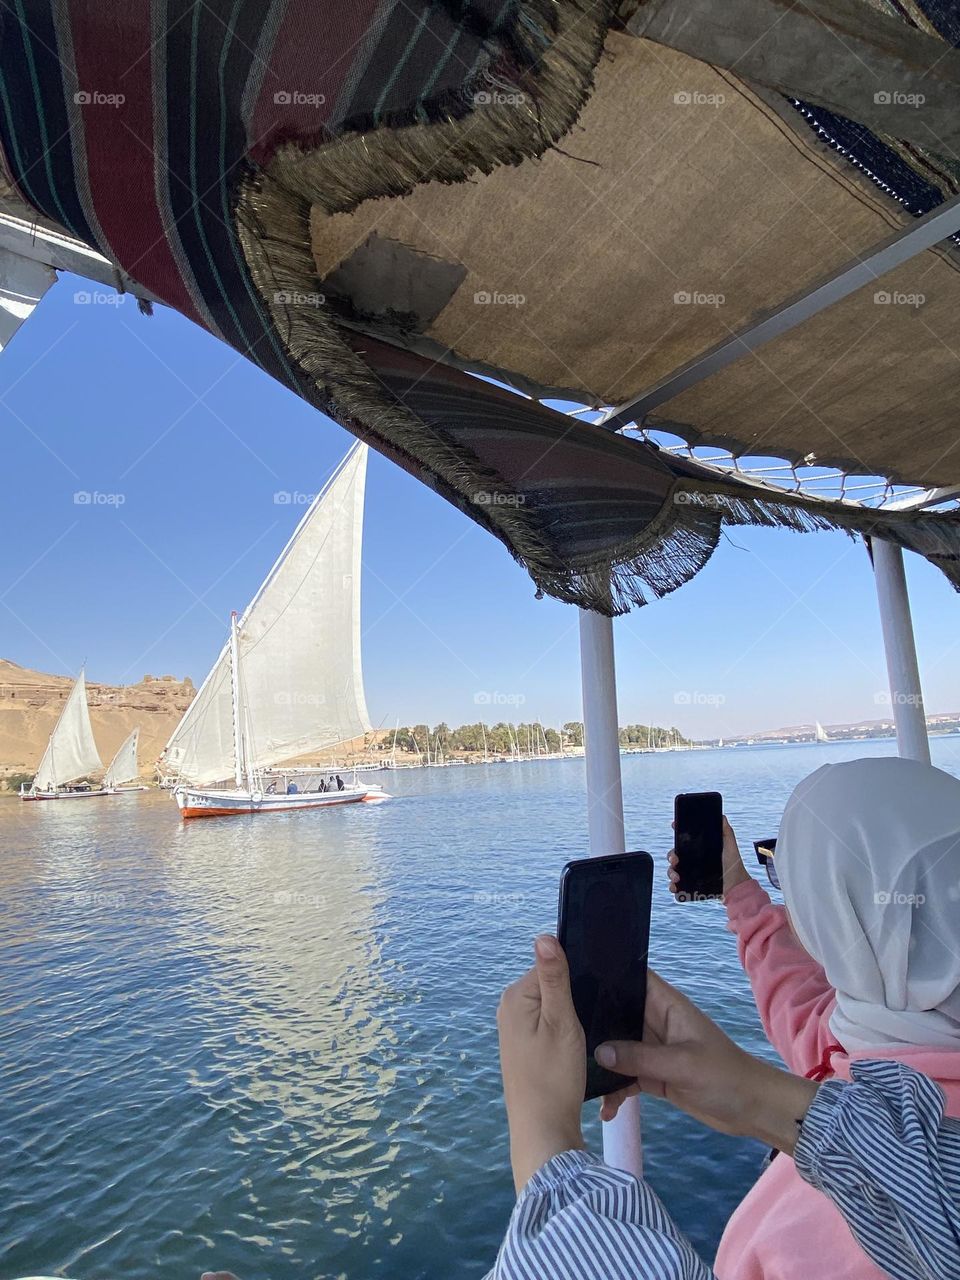 Girls are using their phones to capture a beautiful view